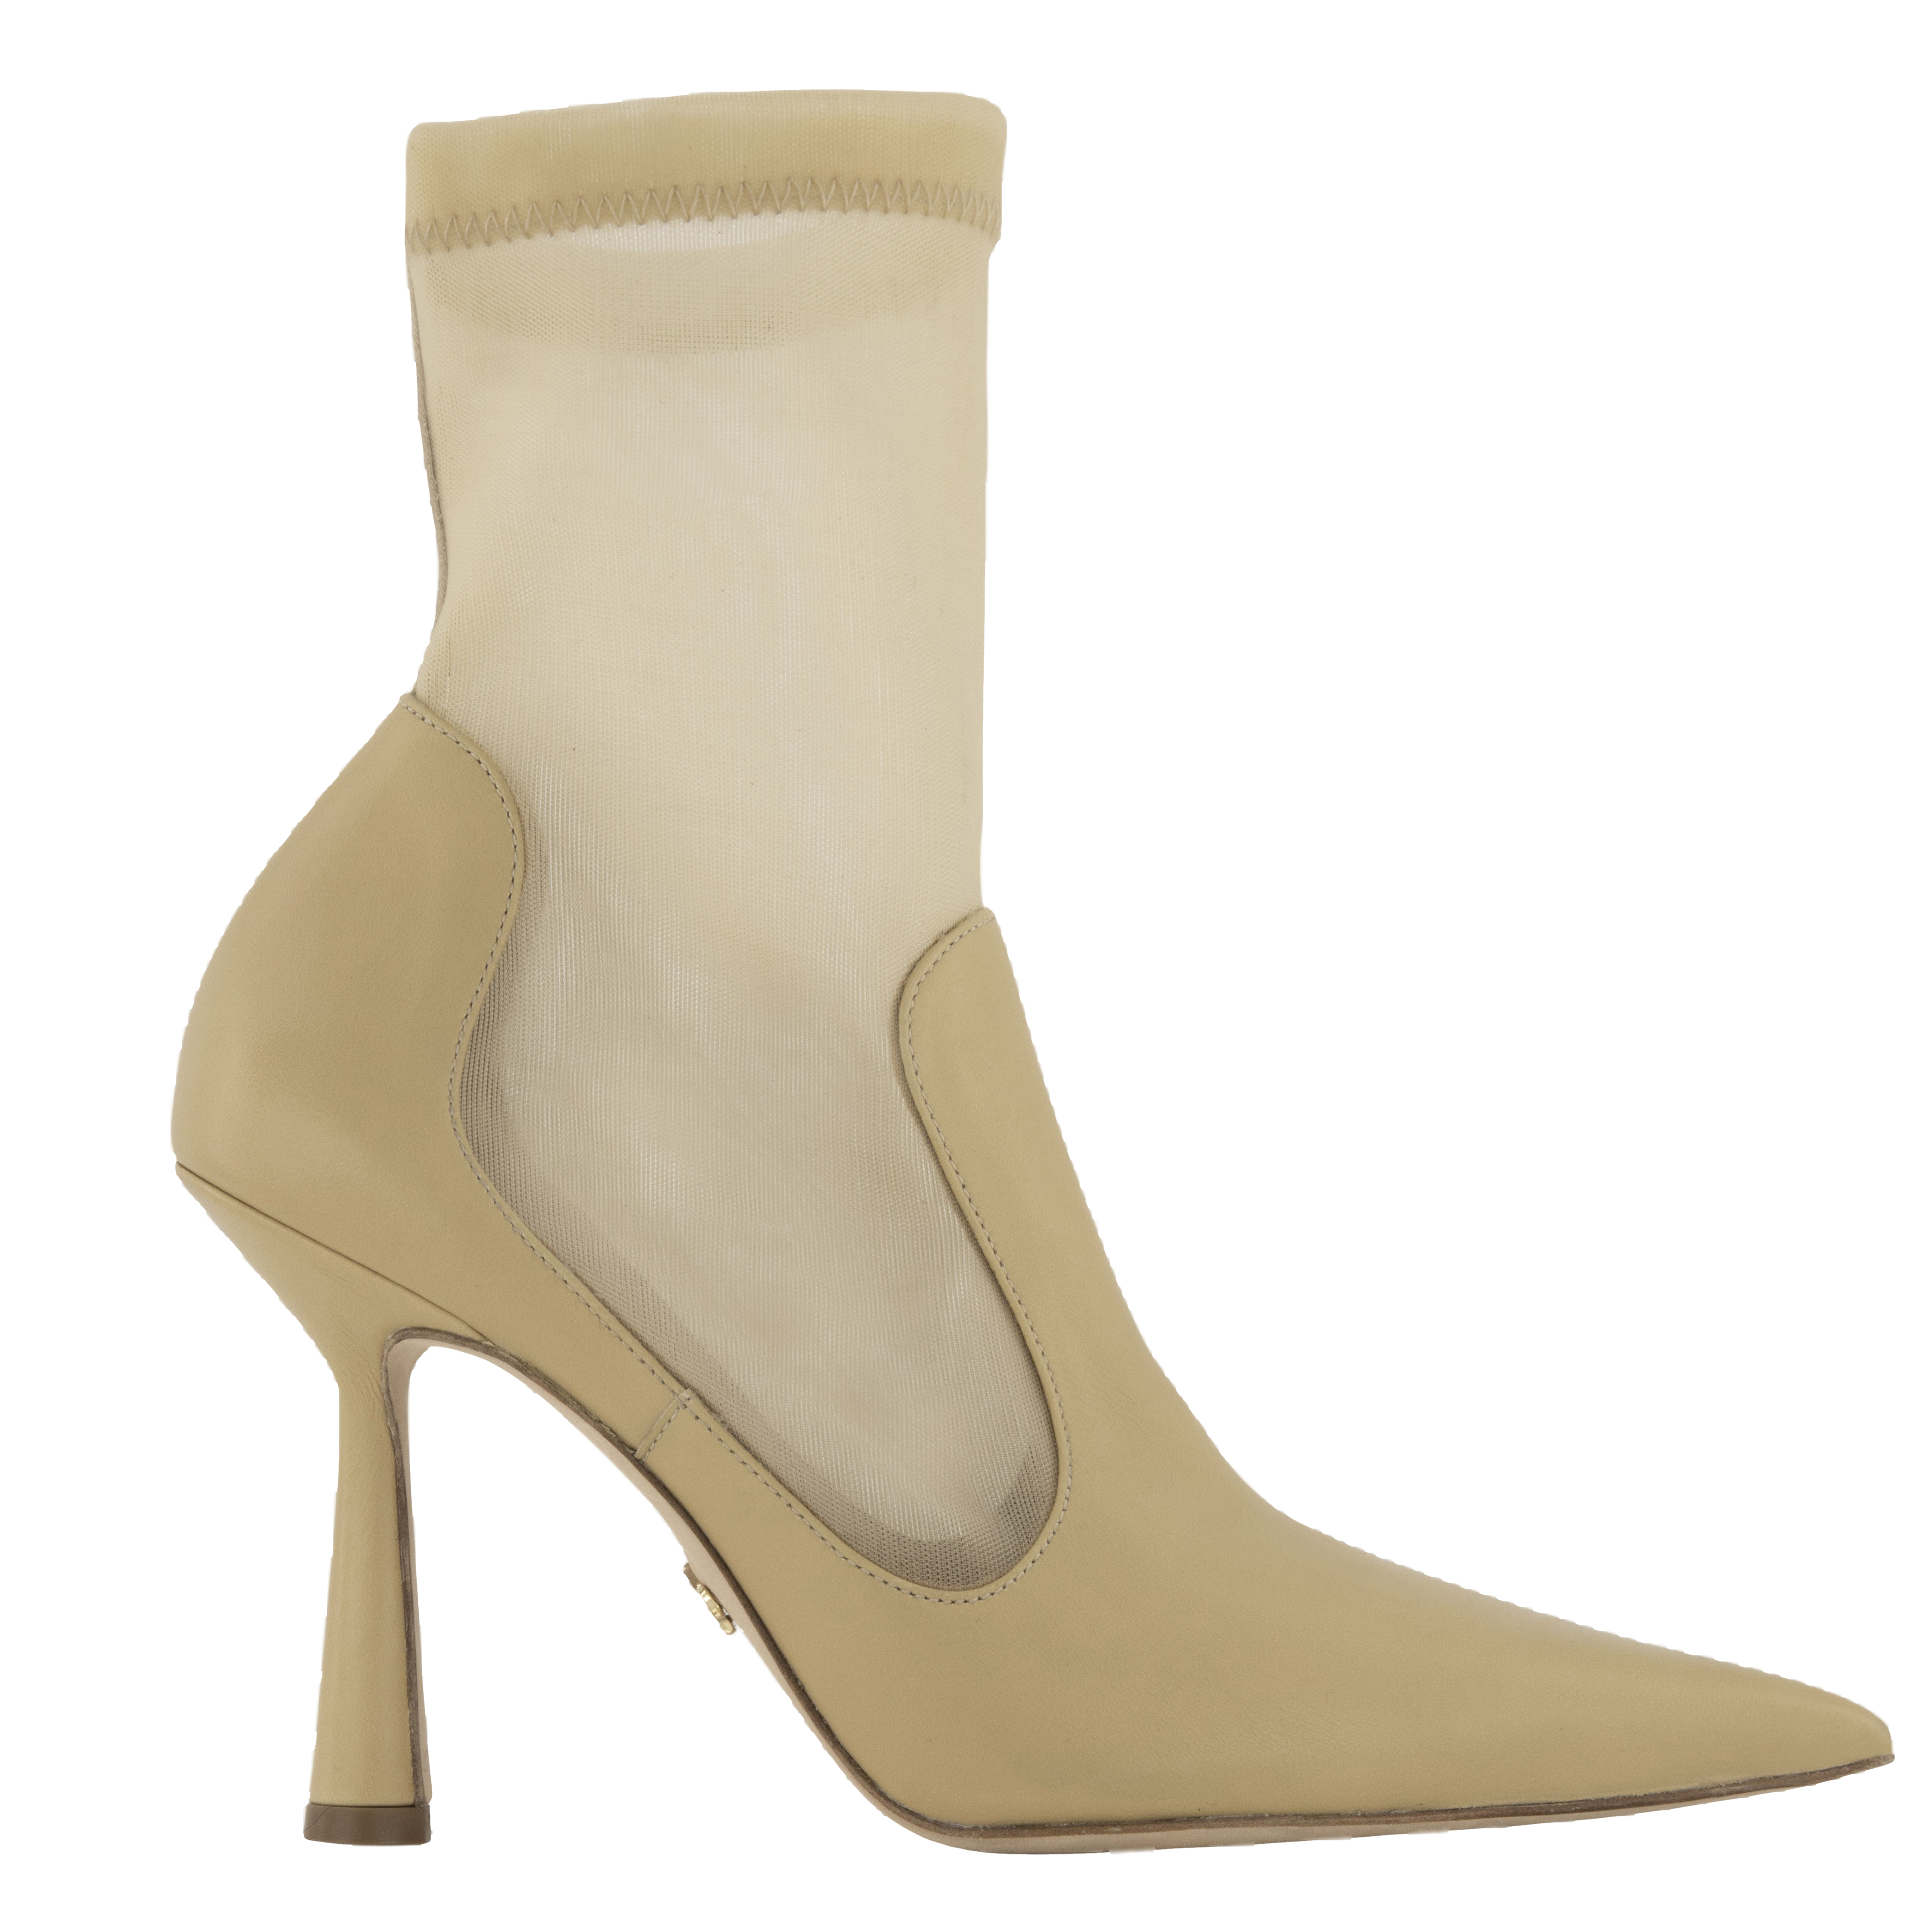 Atana Anna Boot 95 Wheat Leather In Beige